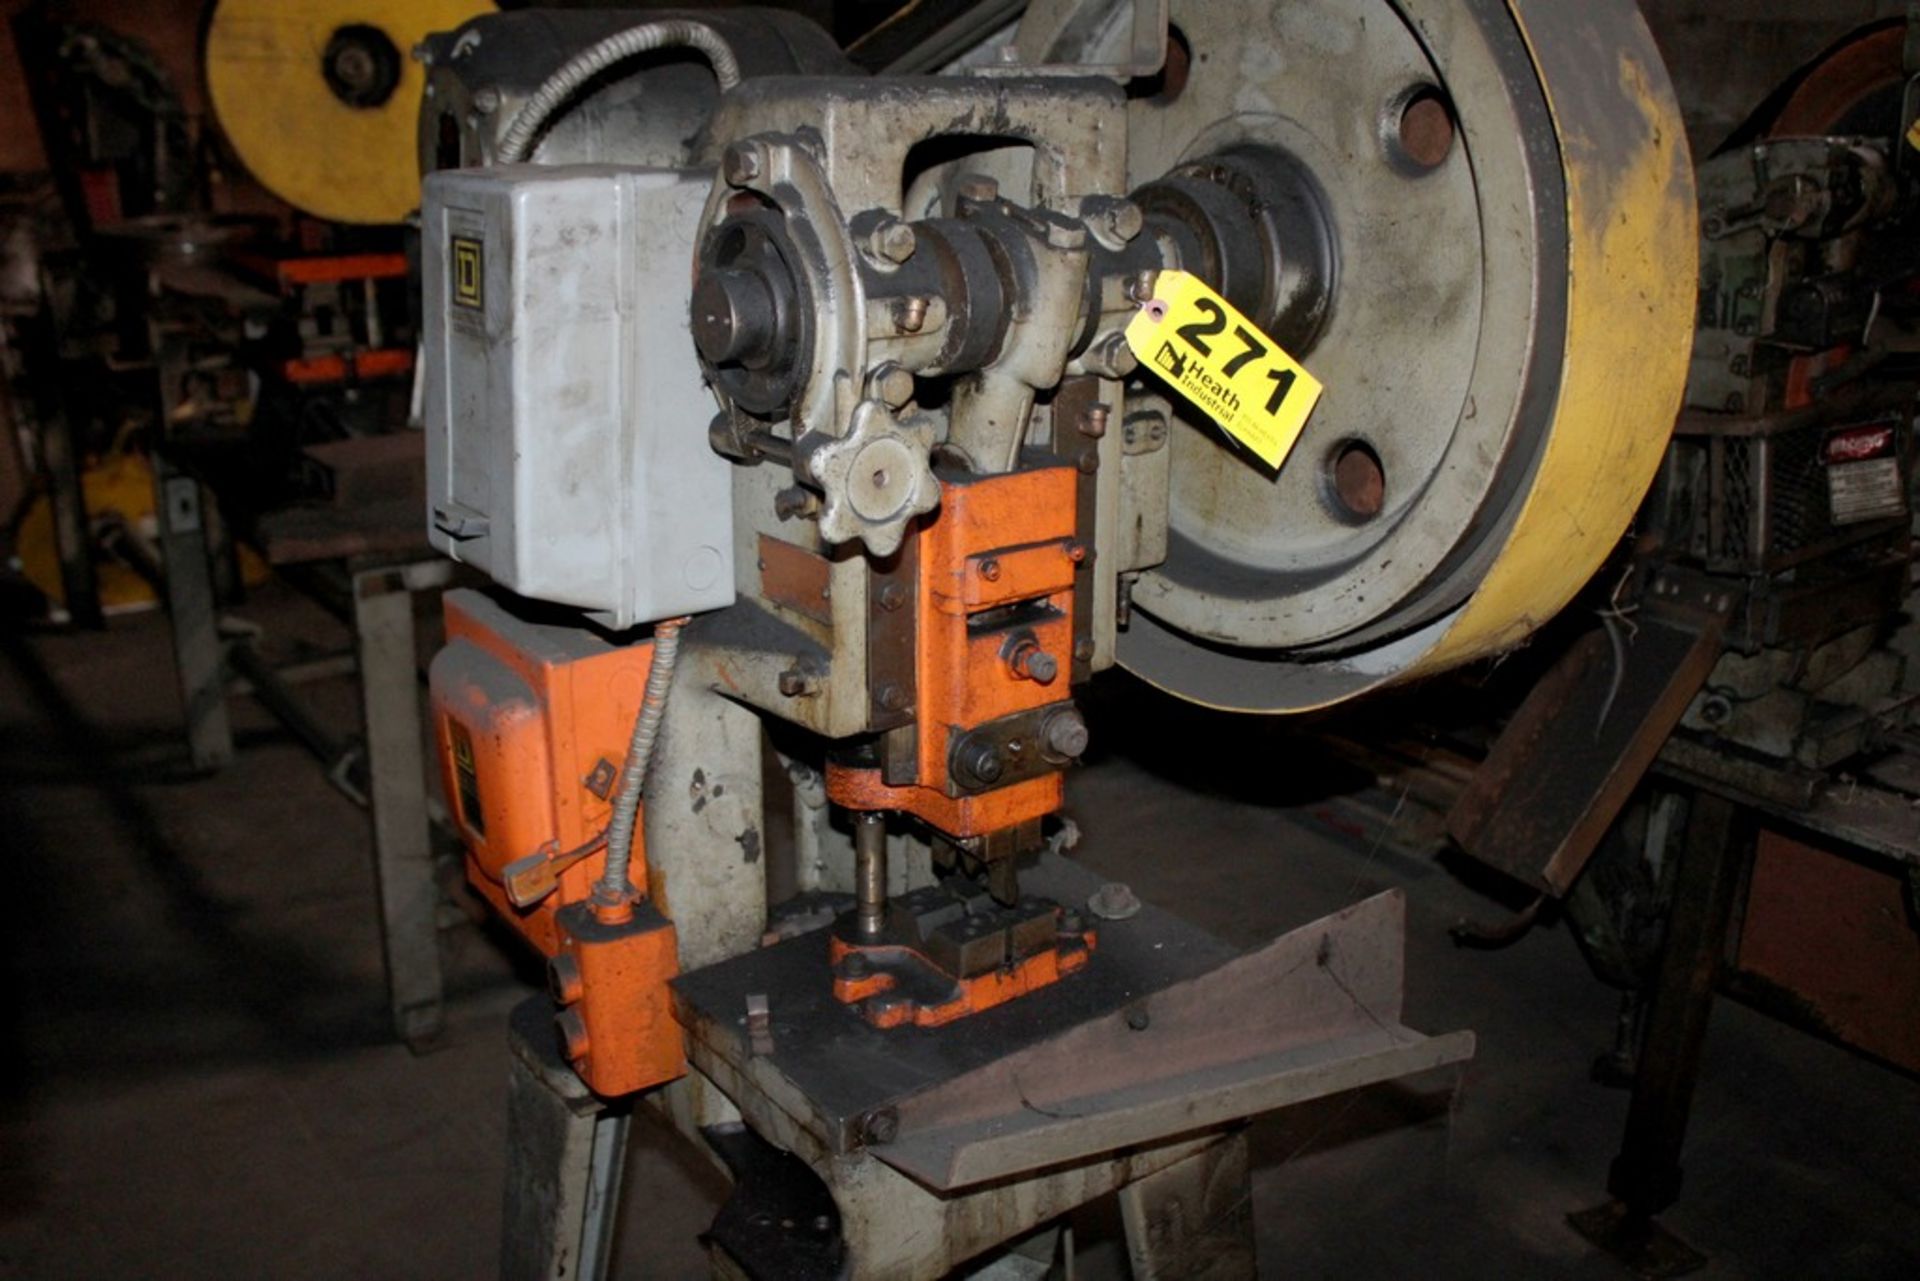 Perkins Model 2A OBI Floor Model Punch Press (Out of Service), 15 Ton - 1 1/2" Stroke - Mechanical - Image 2 of 2